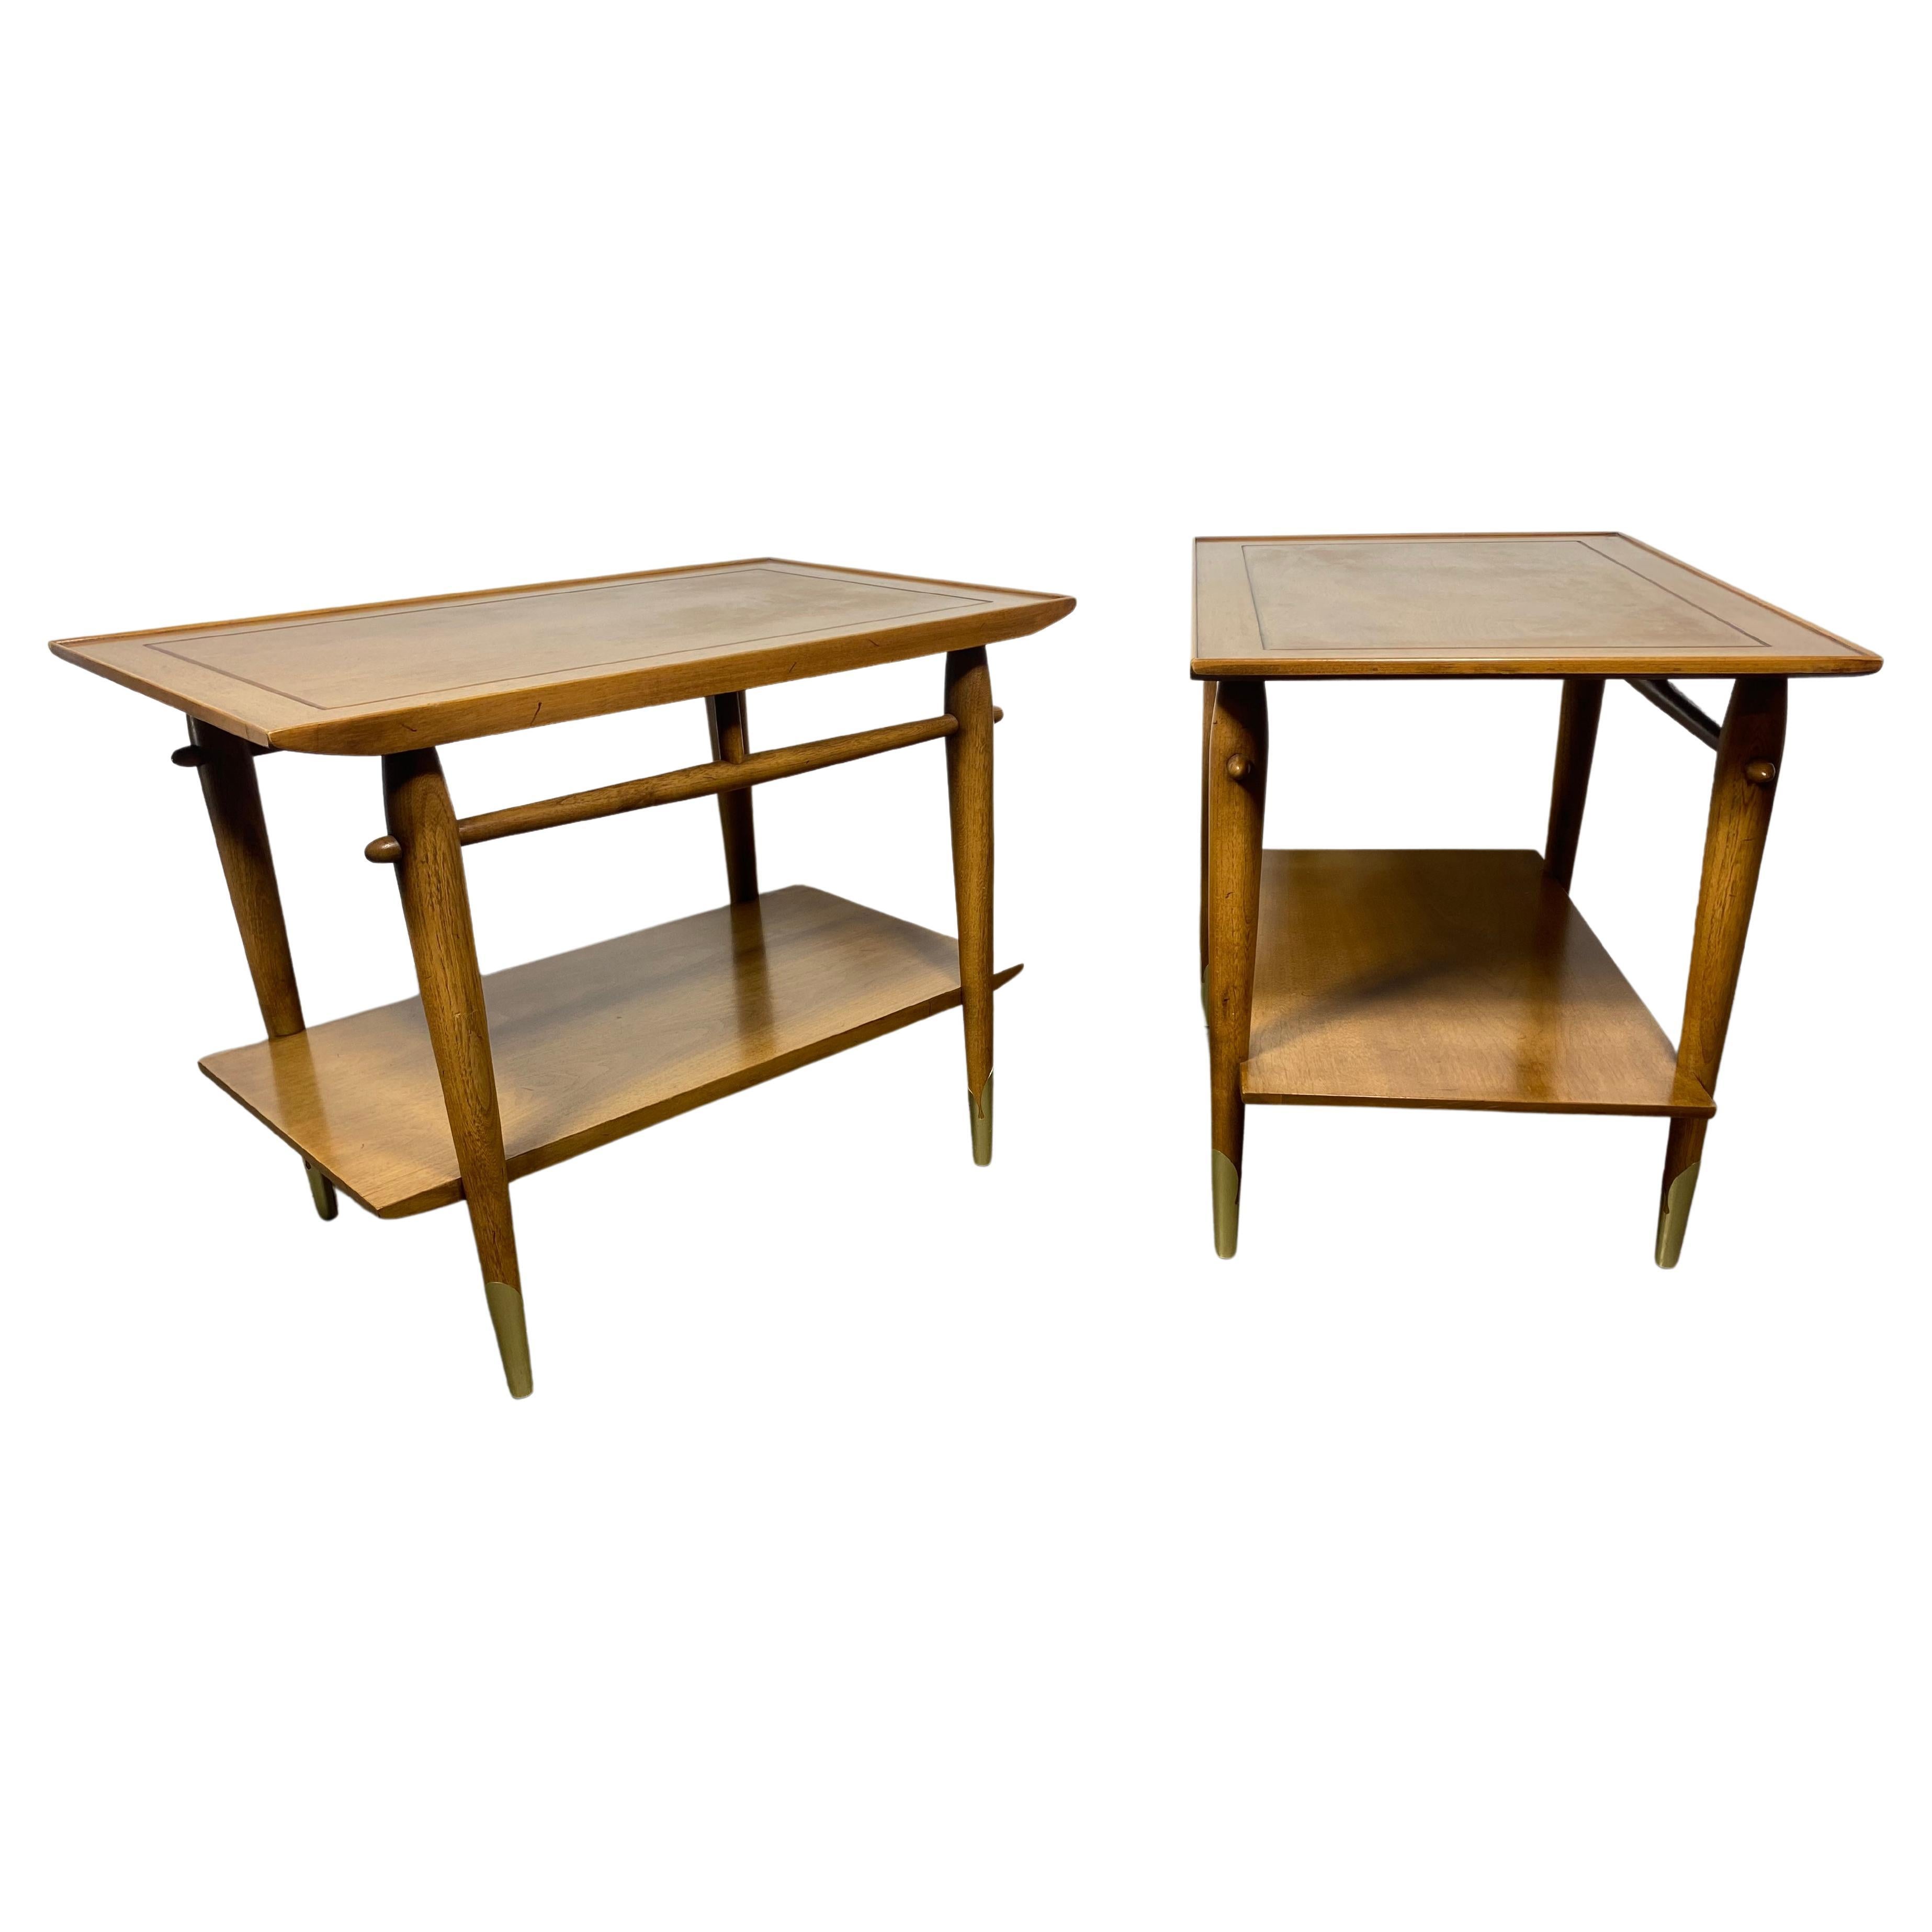 Classic Modern two-tier walnut tables by Lane from the "Copenhagen Collection". For Sale